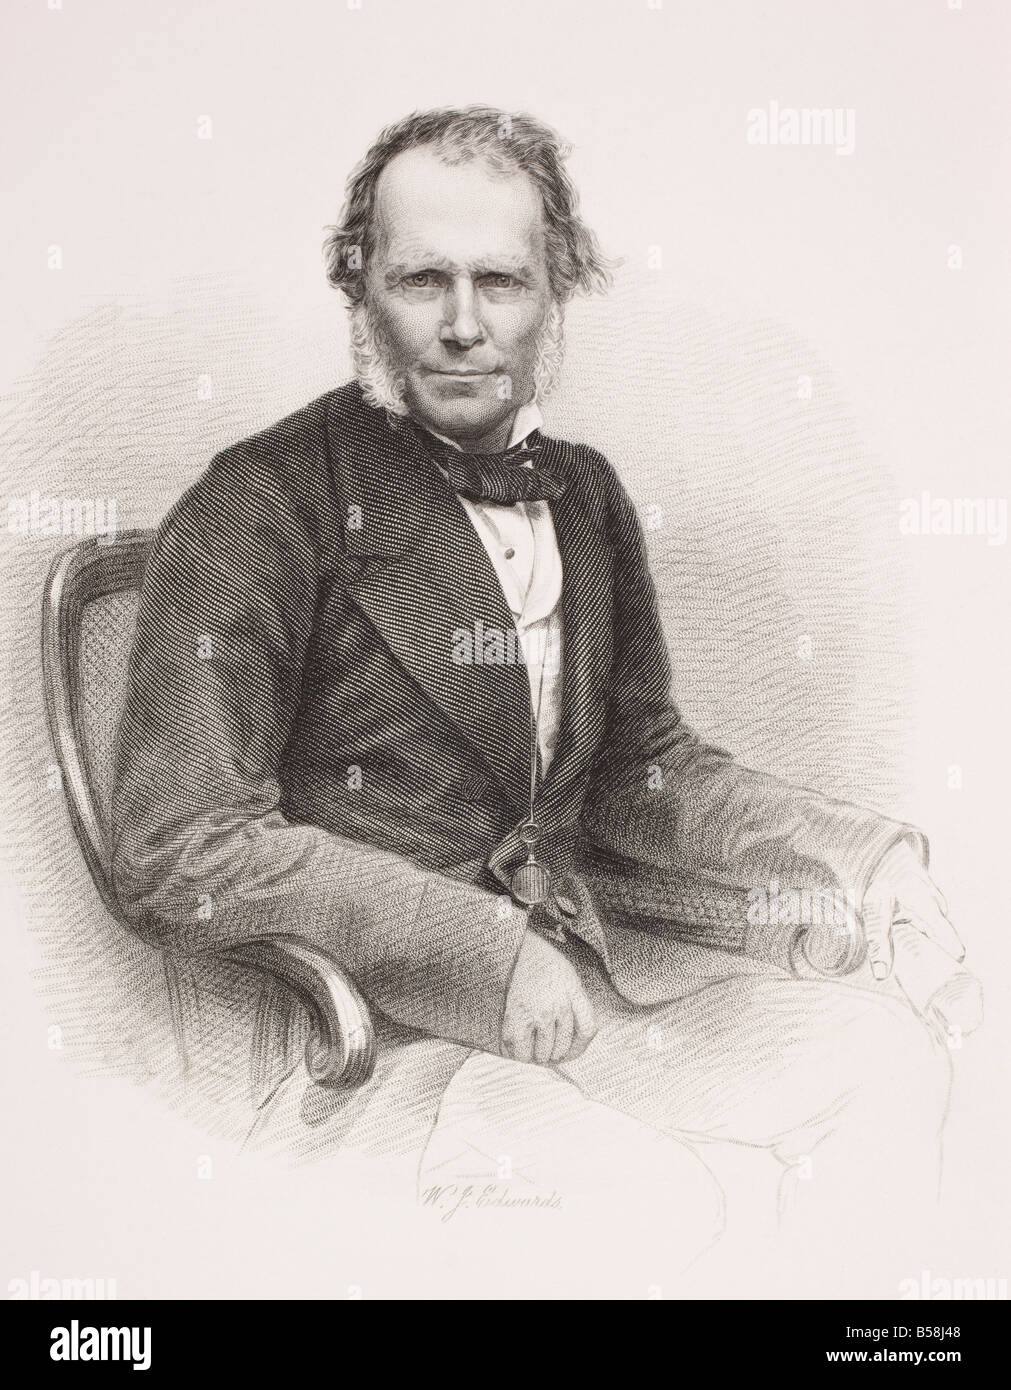 Sir James Brooke, 1803 -1868. First White Rajah of Sarawak. From the book Gallery of Historical Portraits, published c.1880. Stock Photo